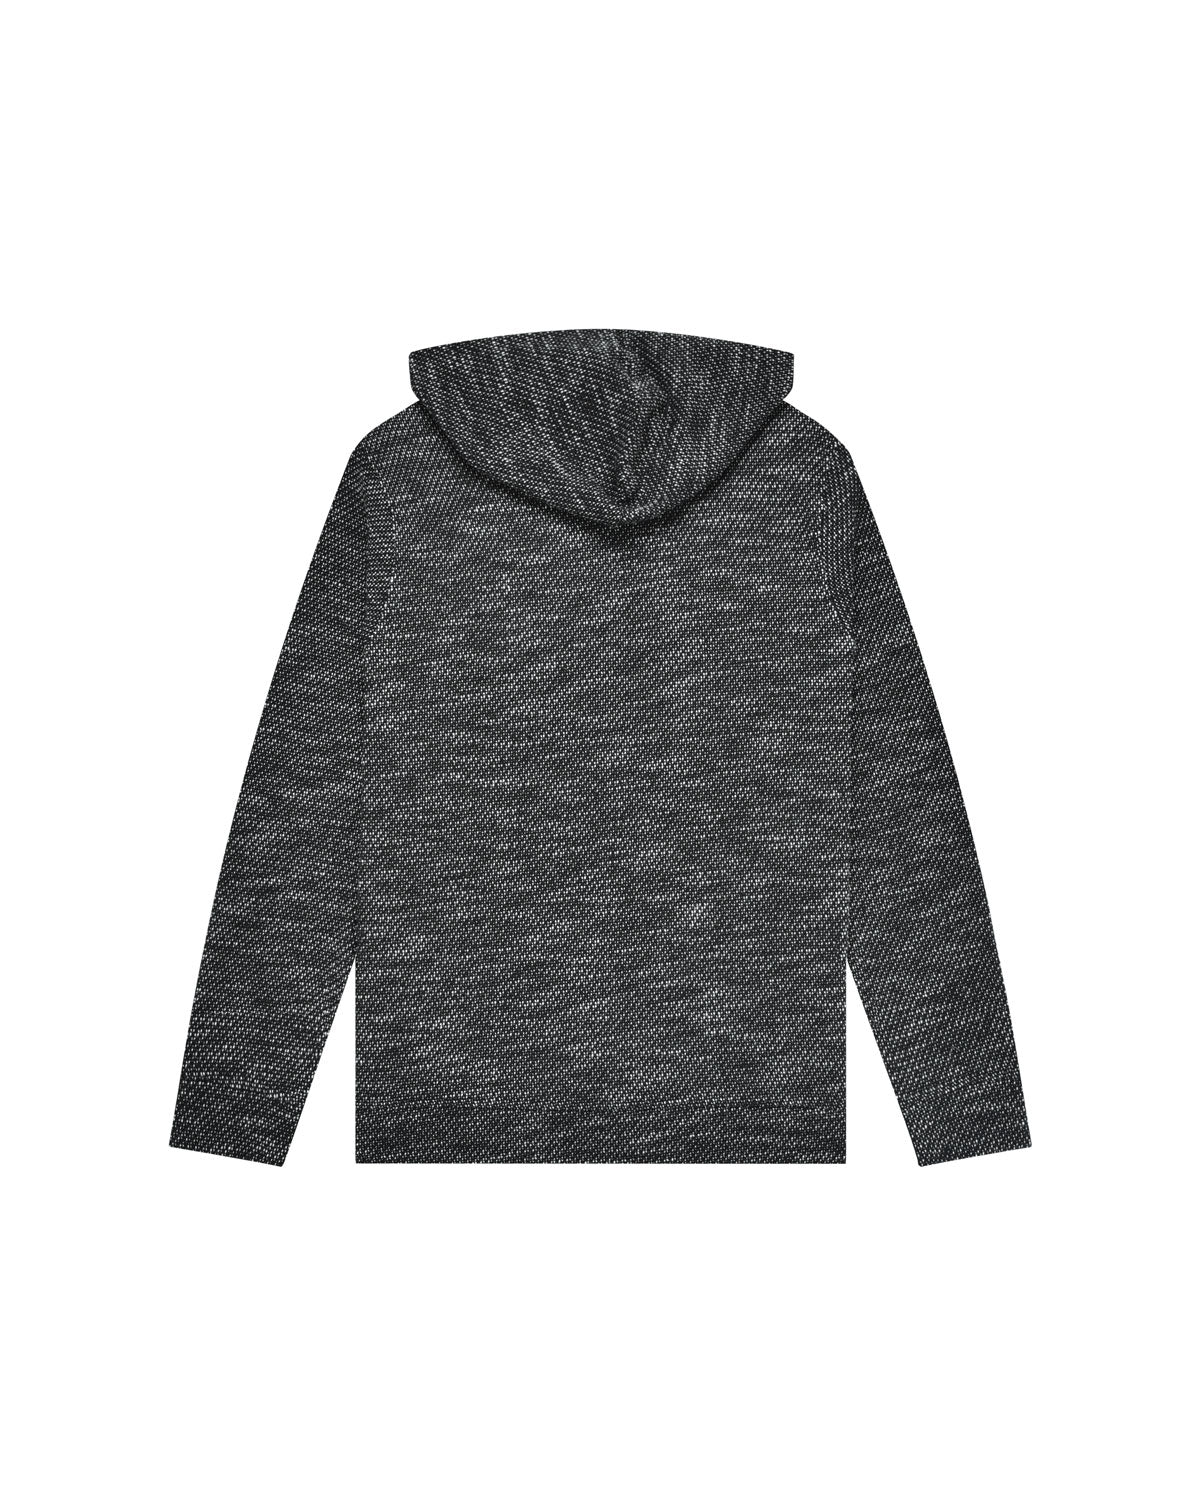 Man | Black knitted sweater with hood